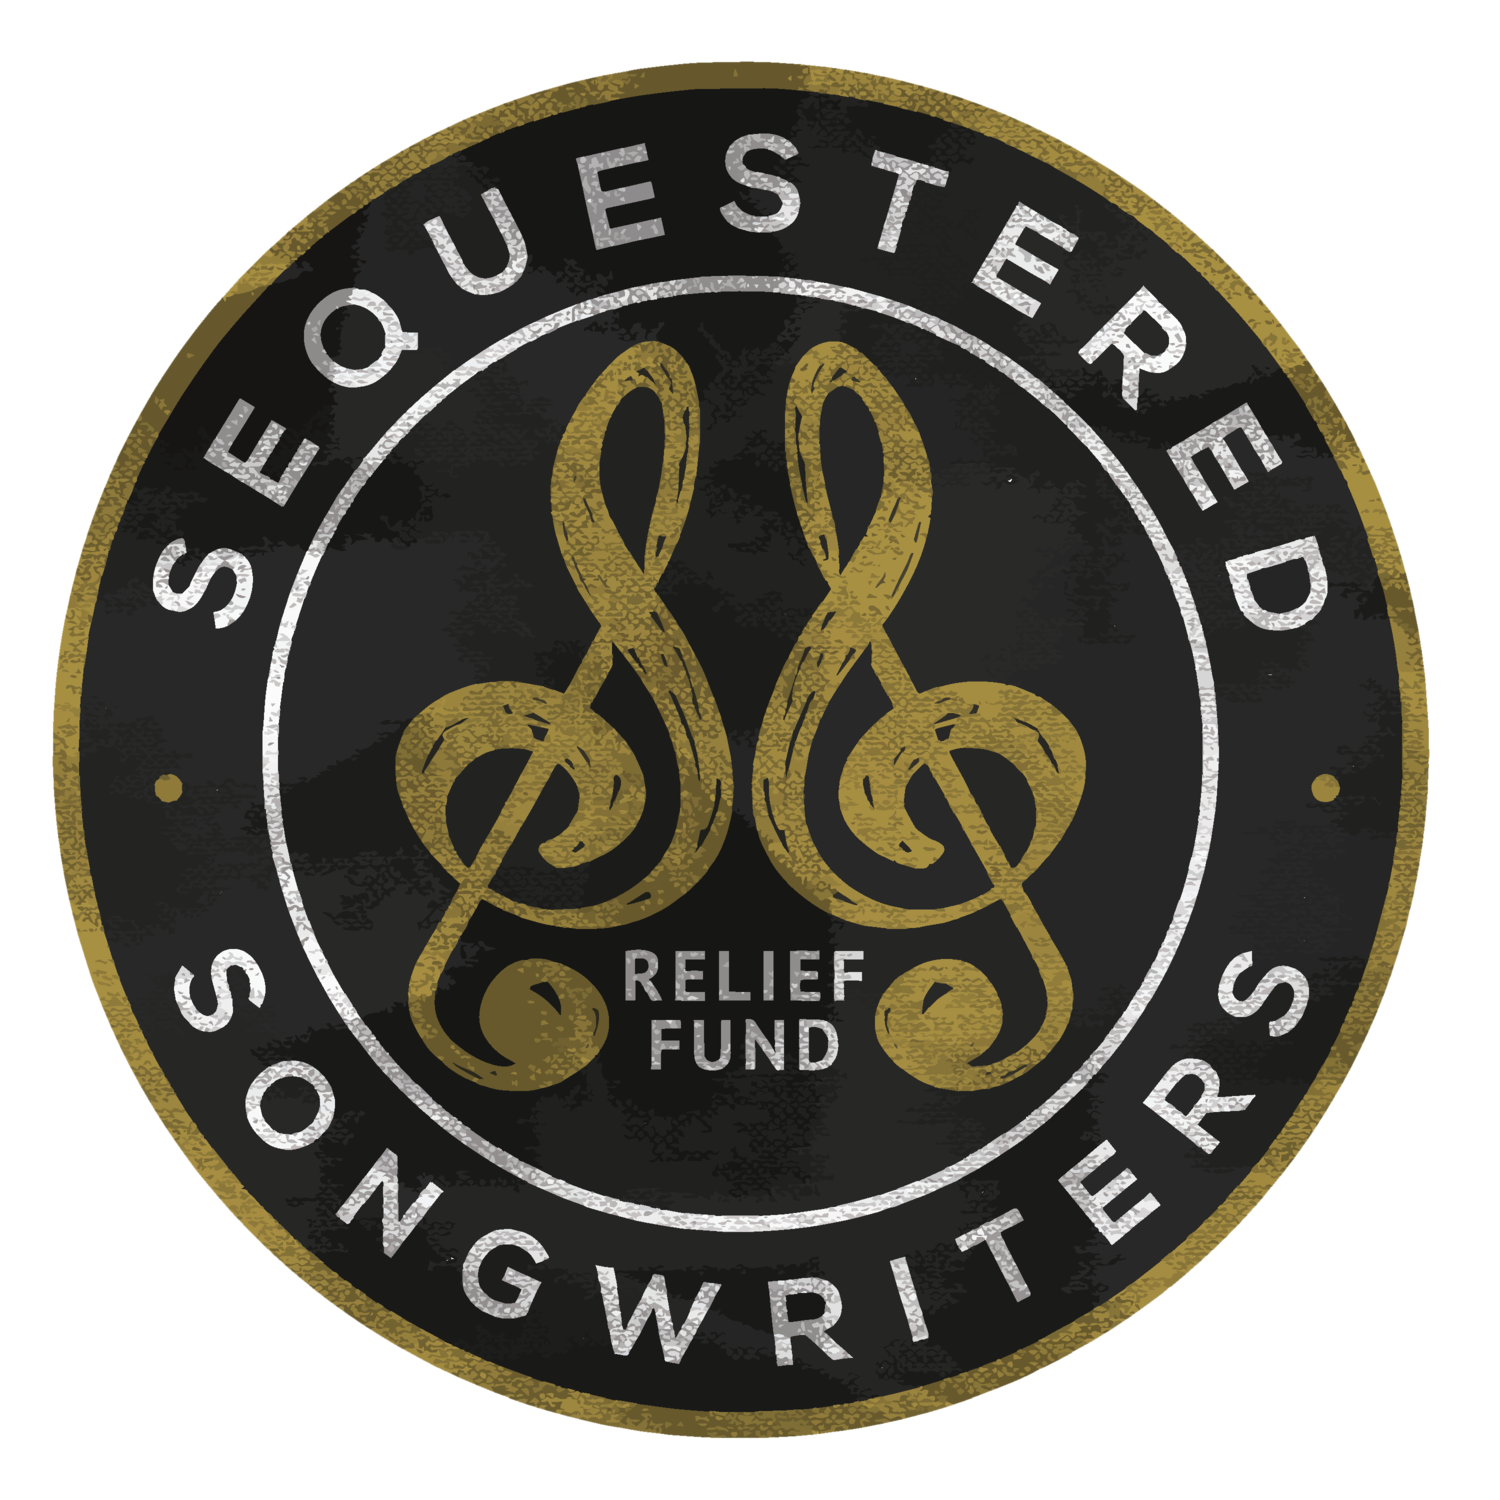 Sequestered Songwriters Relief Fund